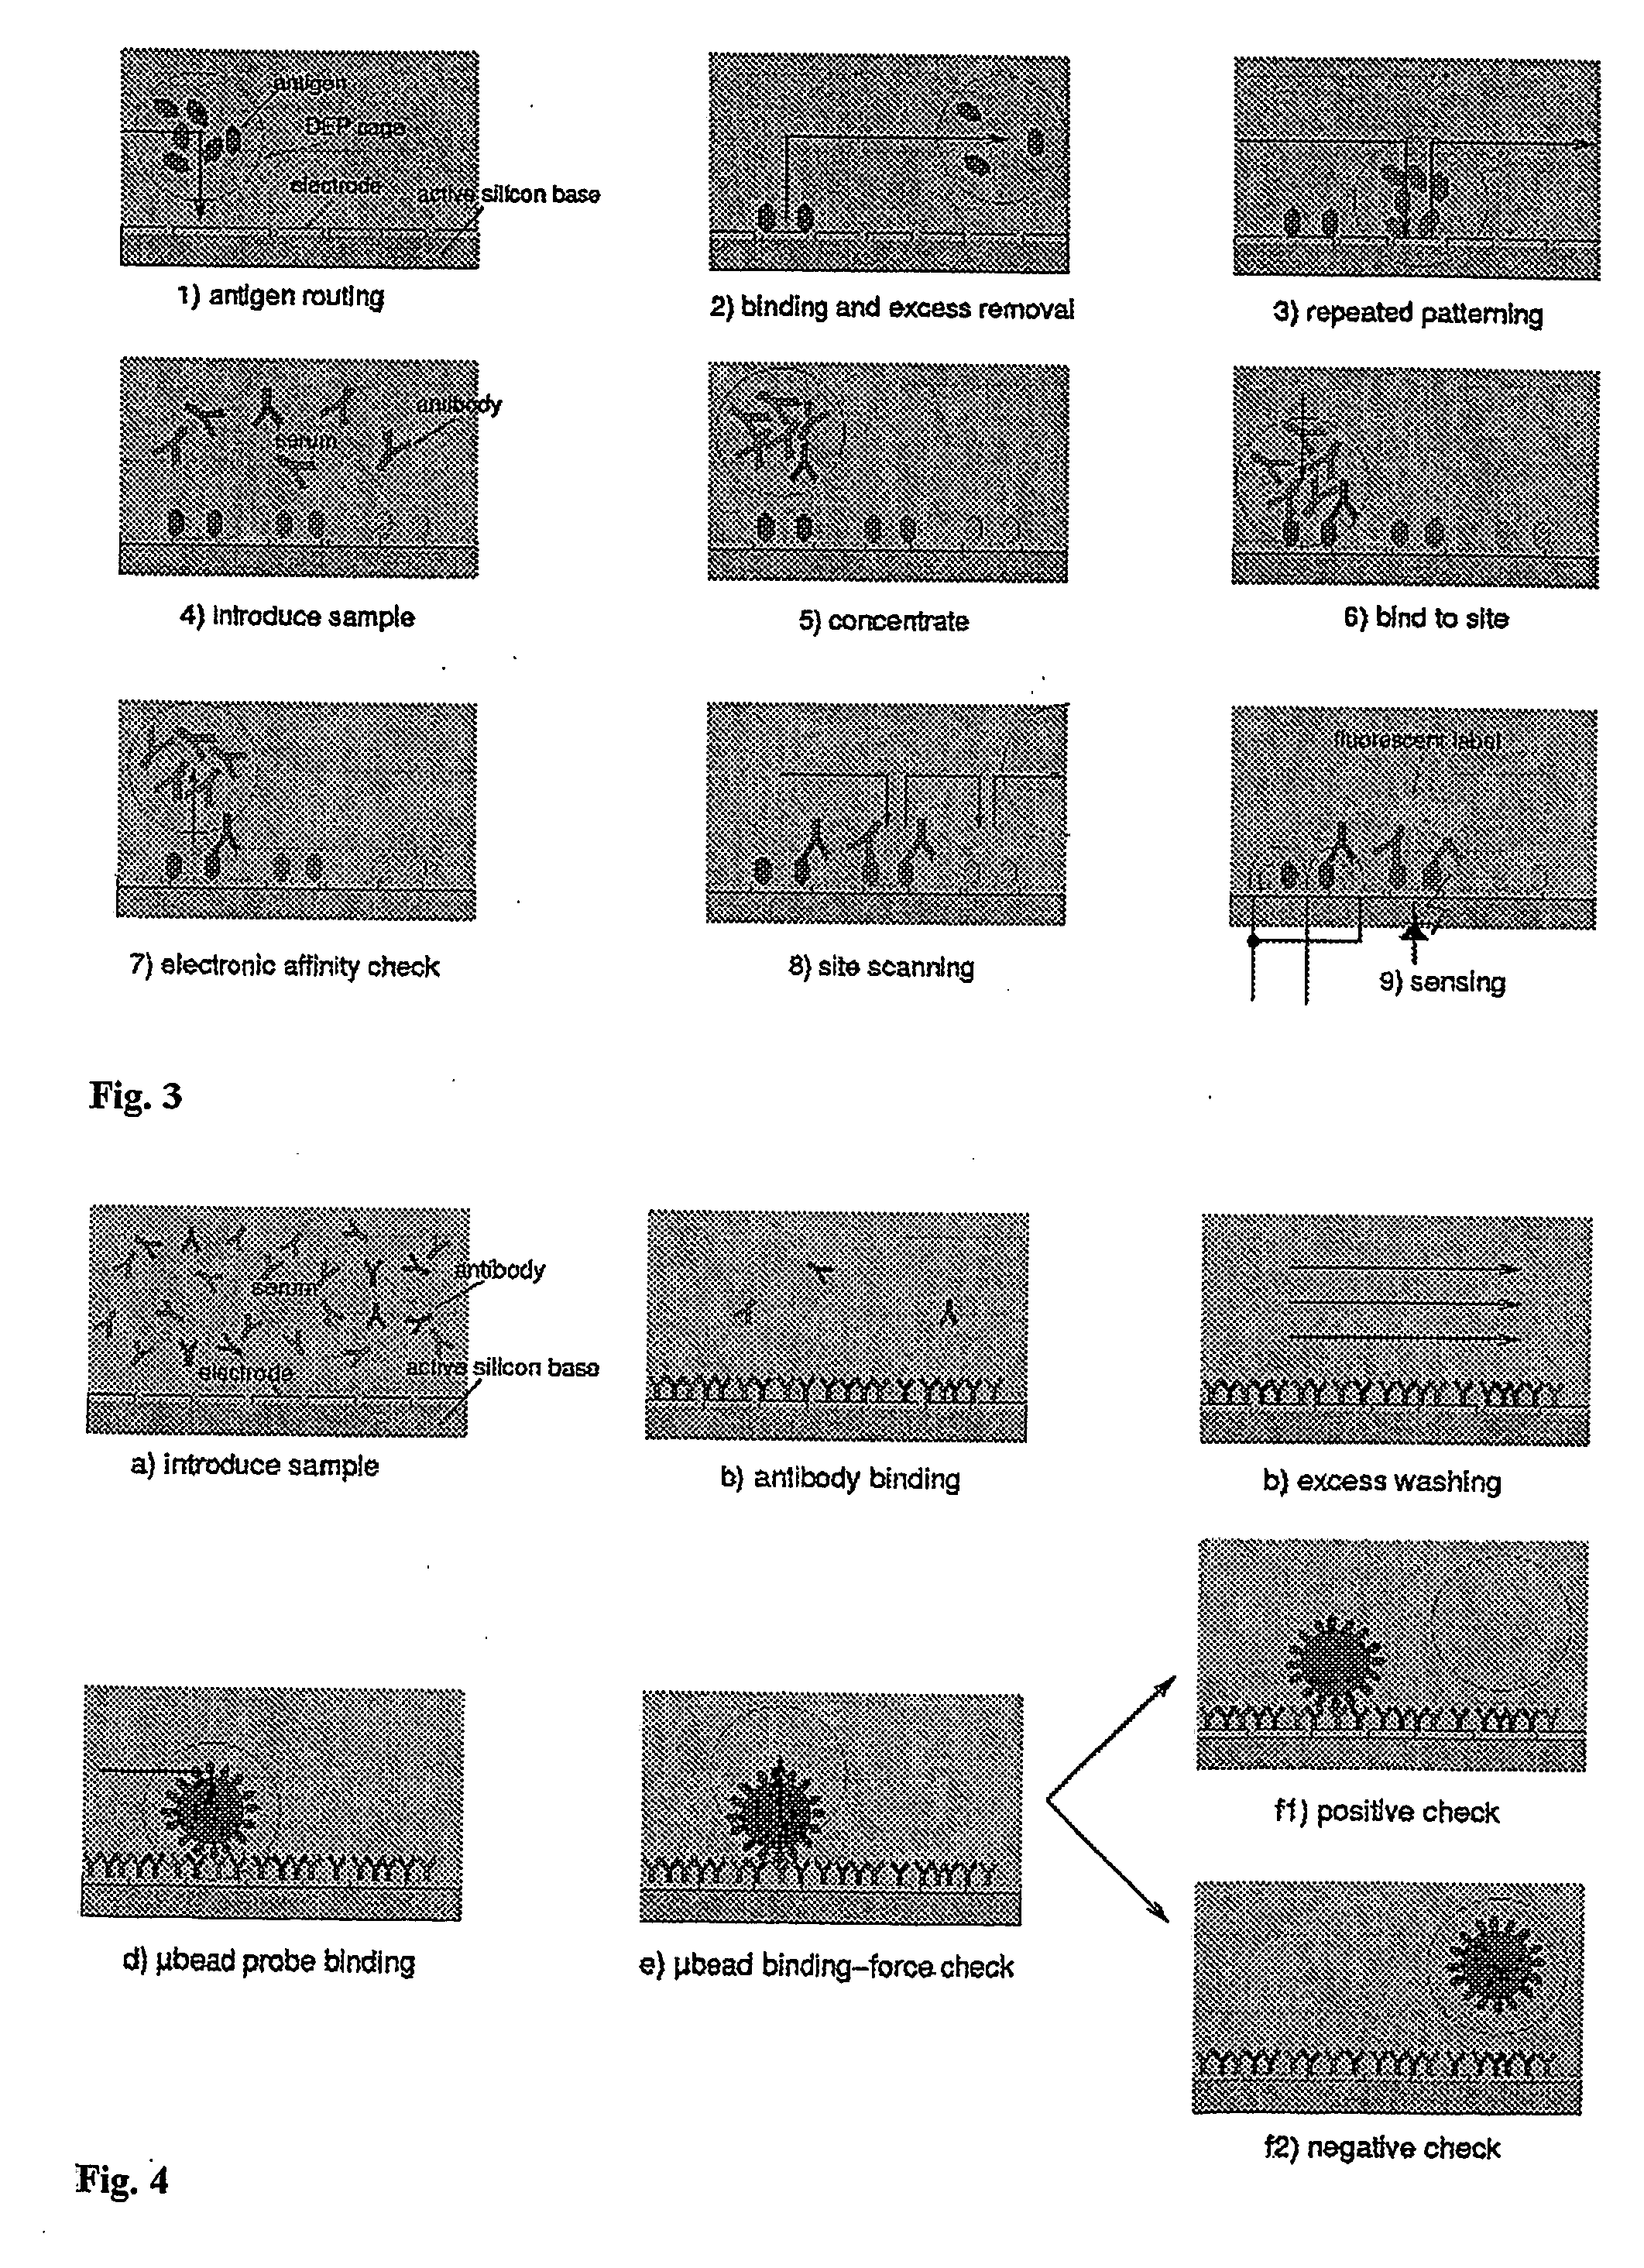 Method and device for integrated biomolecular analyses